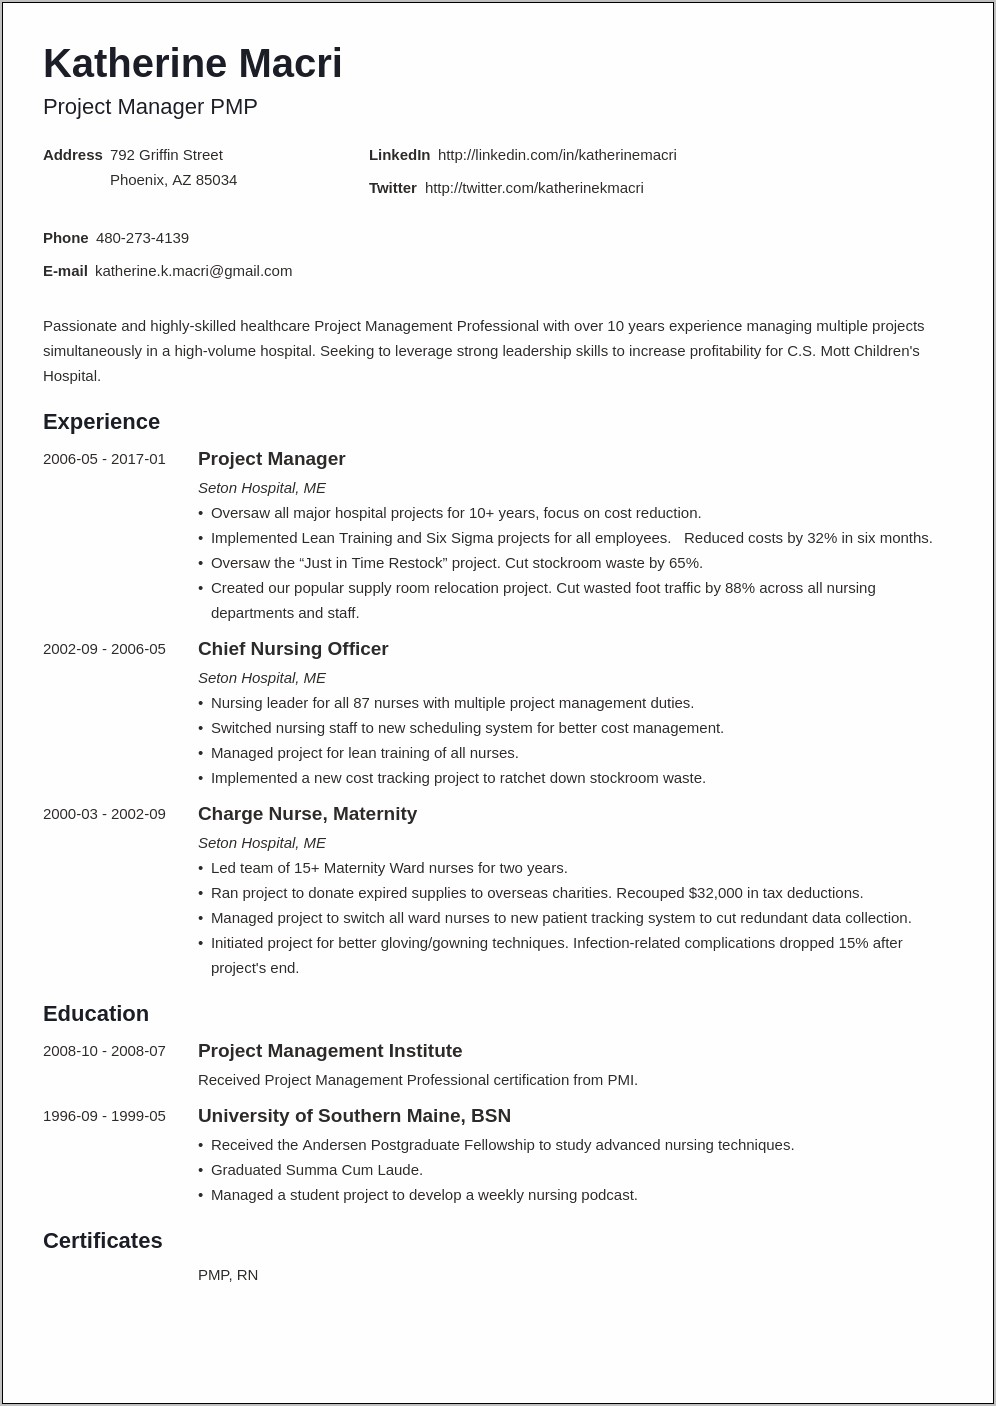 Resume Experience Animal Shelter Manager